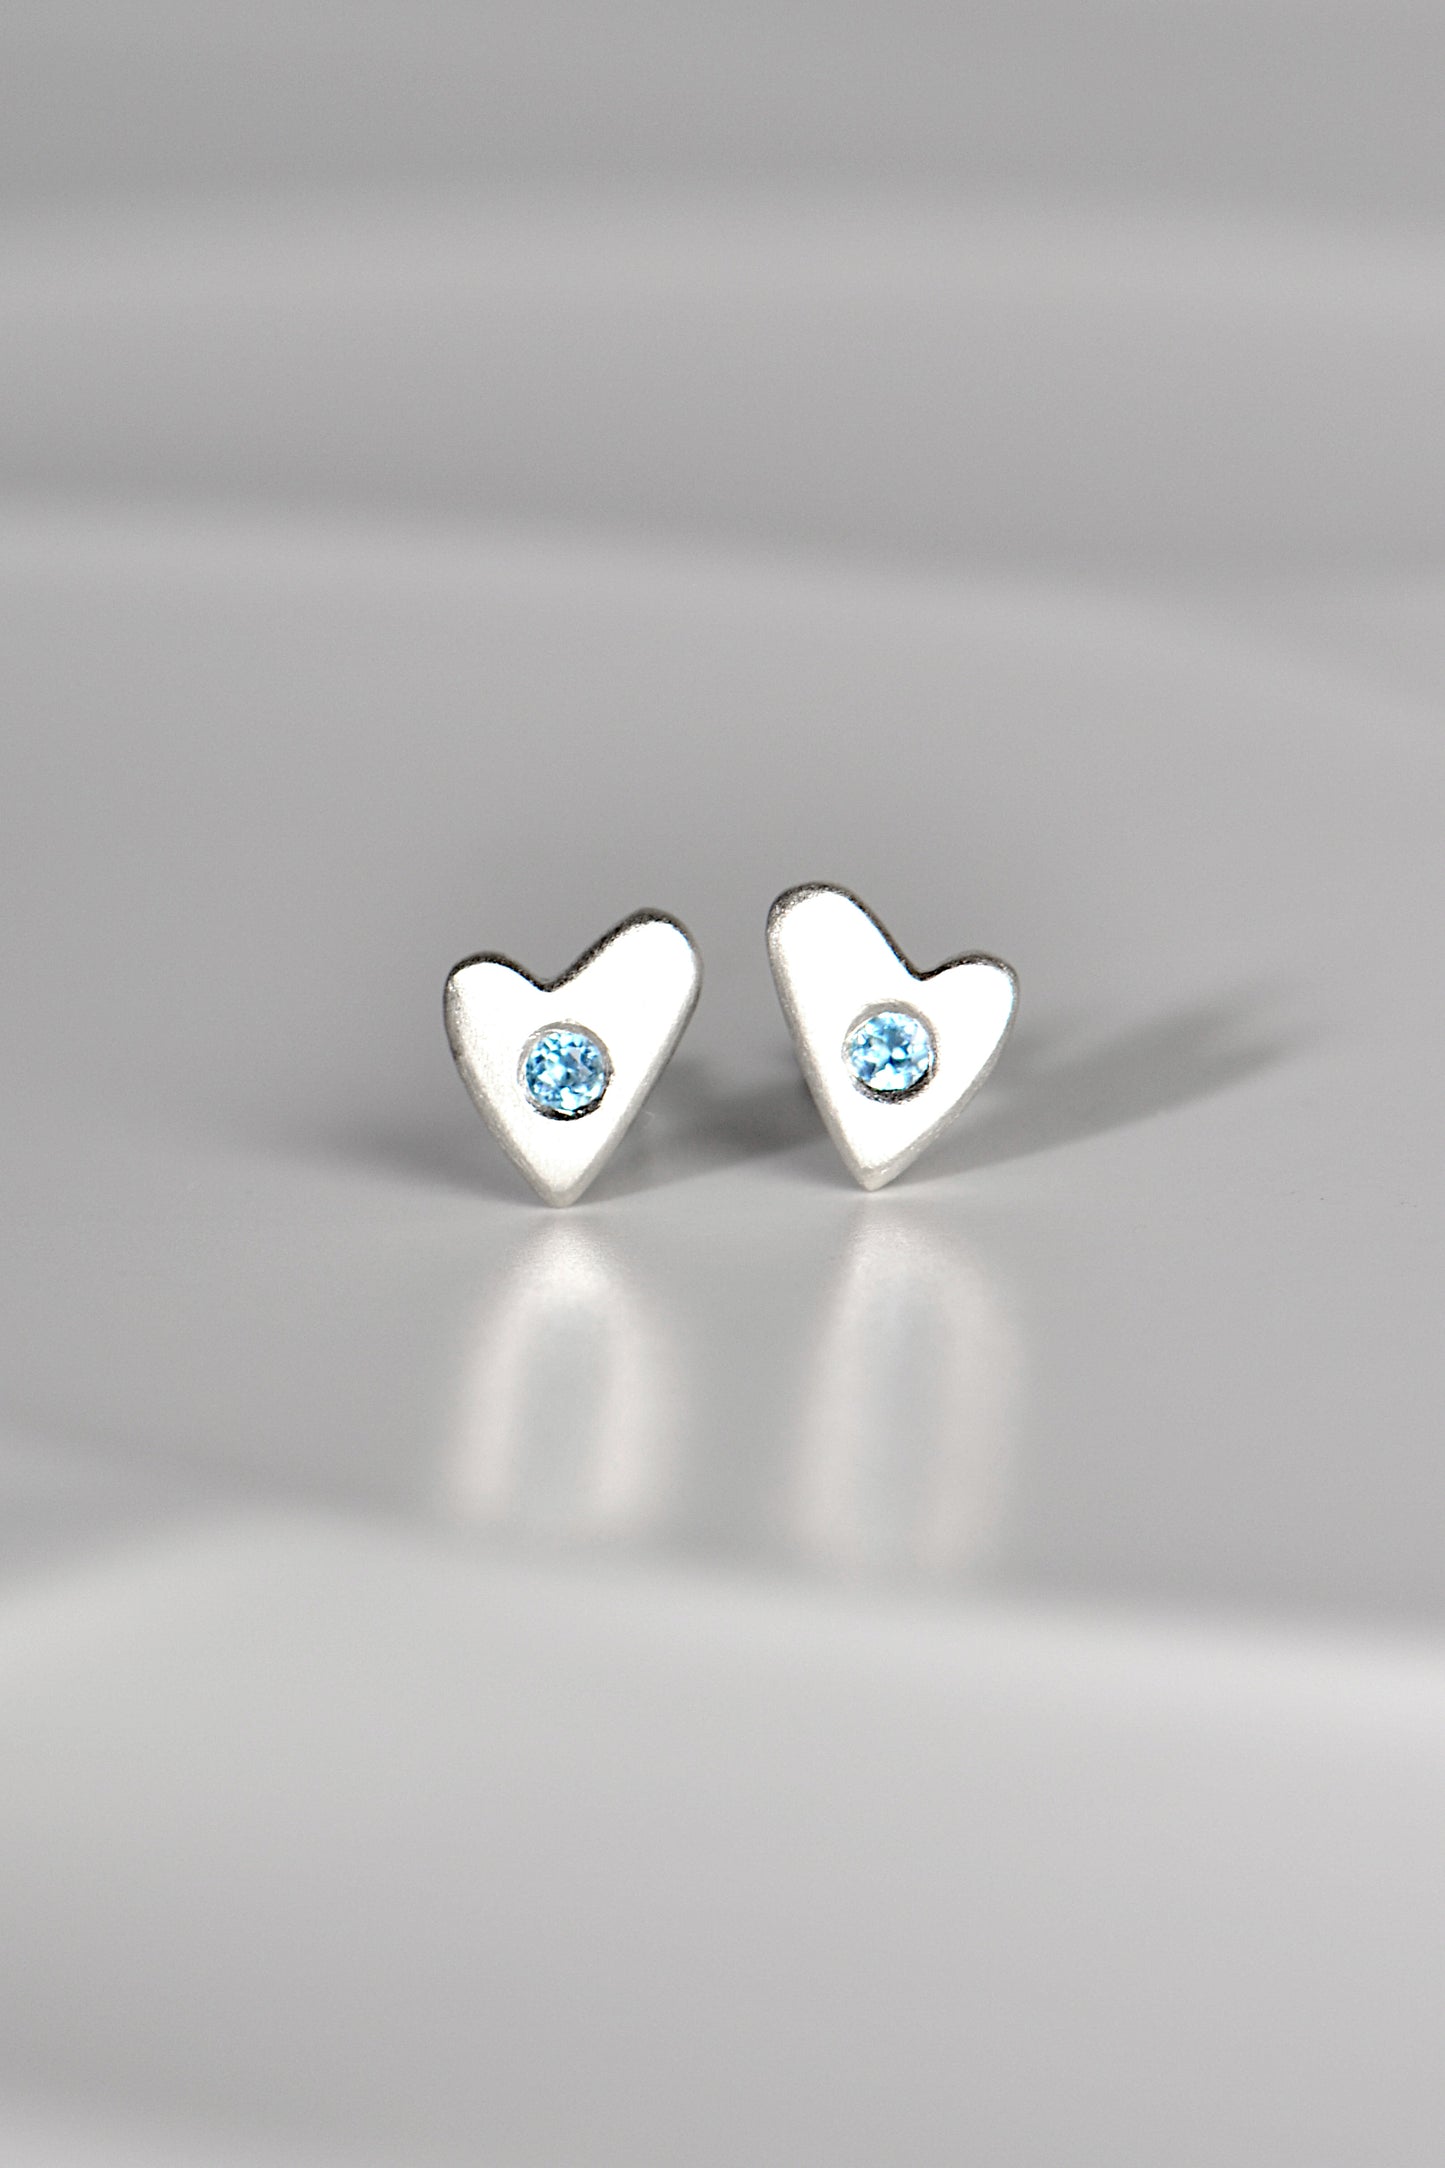 From the heart birthstone studs